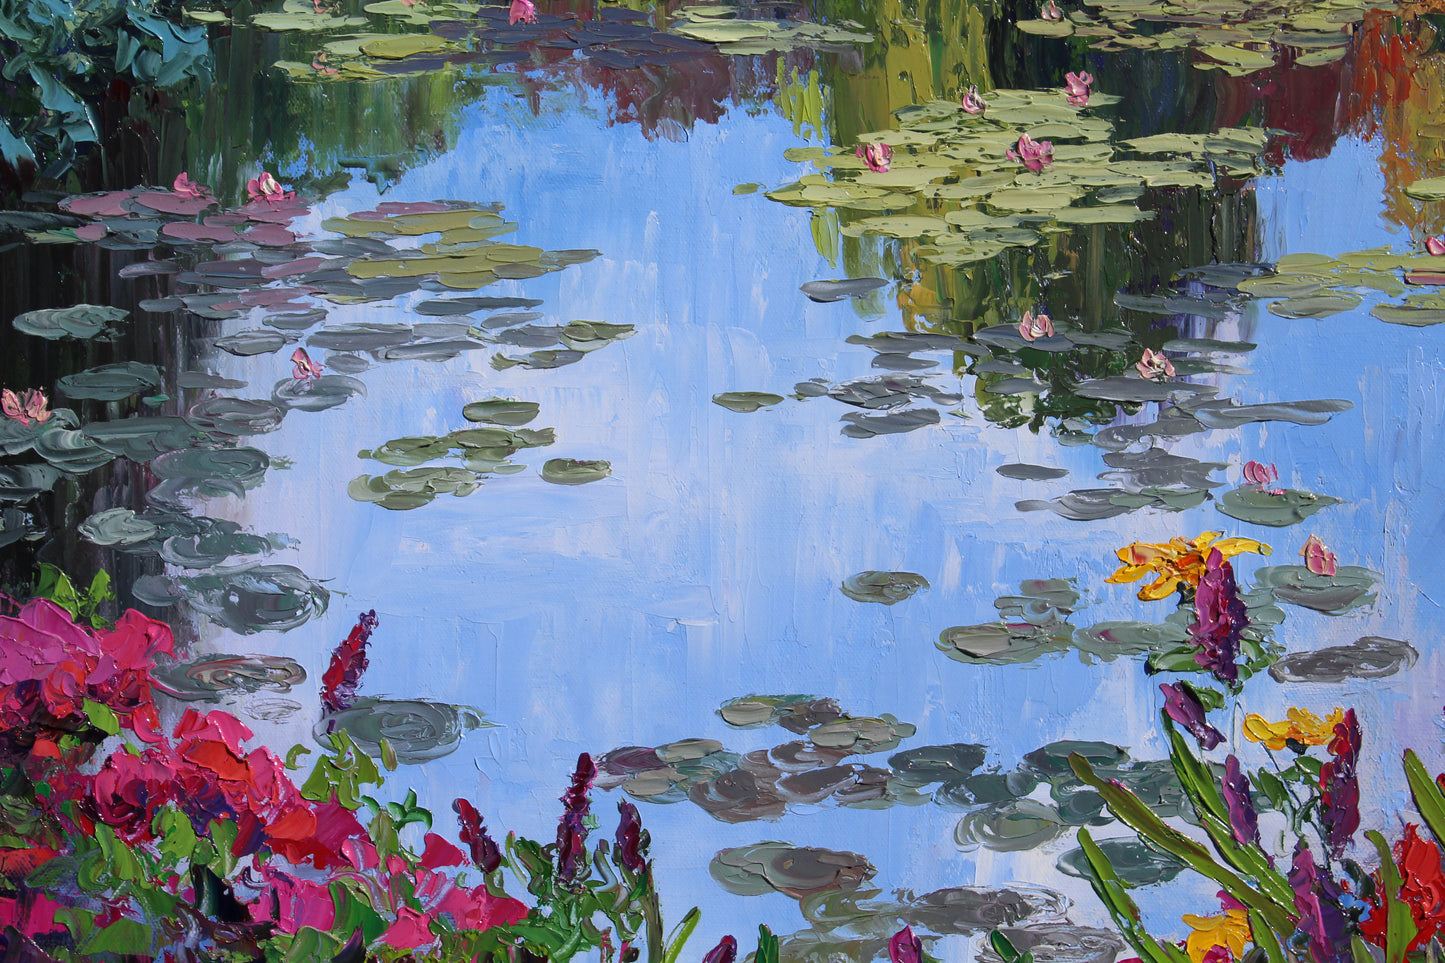 Giverny Gardens, 30" x 24" Garden Landscape Of Monet's Waterlily Pond, Oil On Canvas